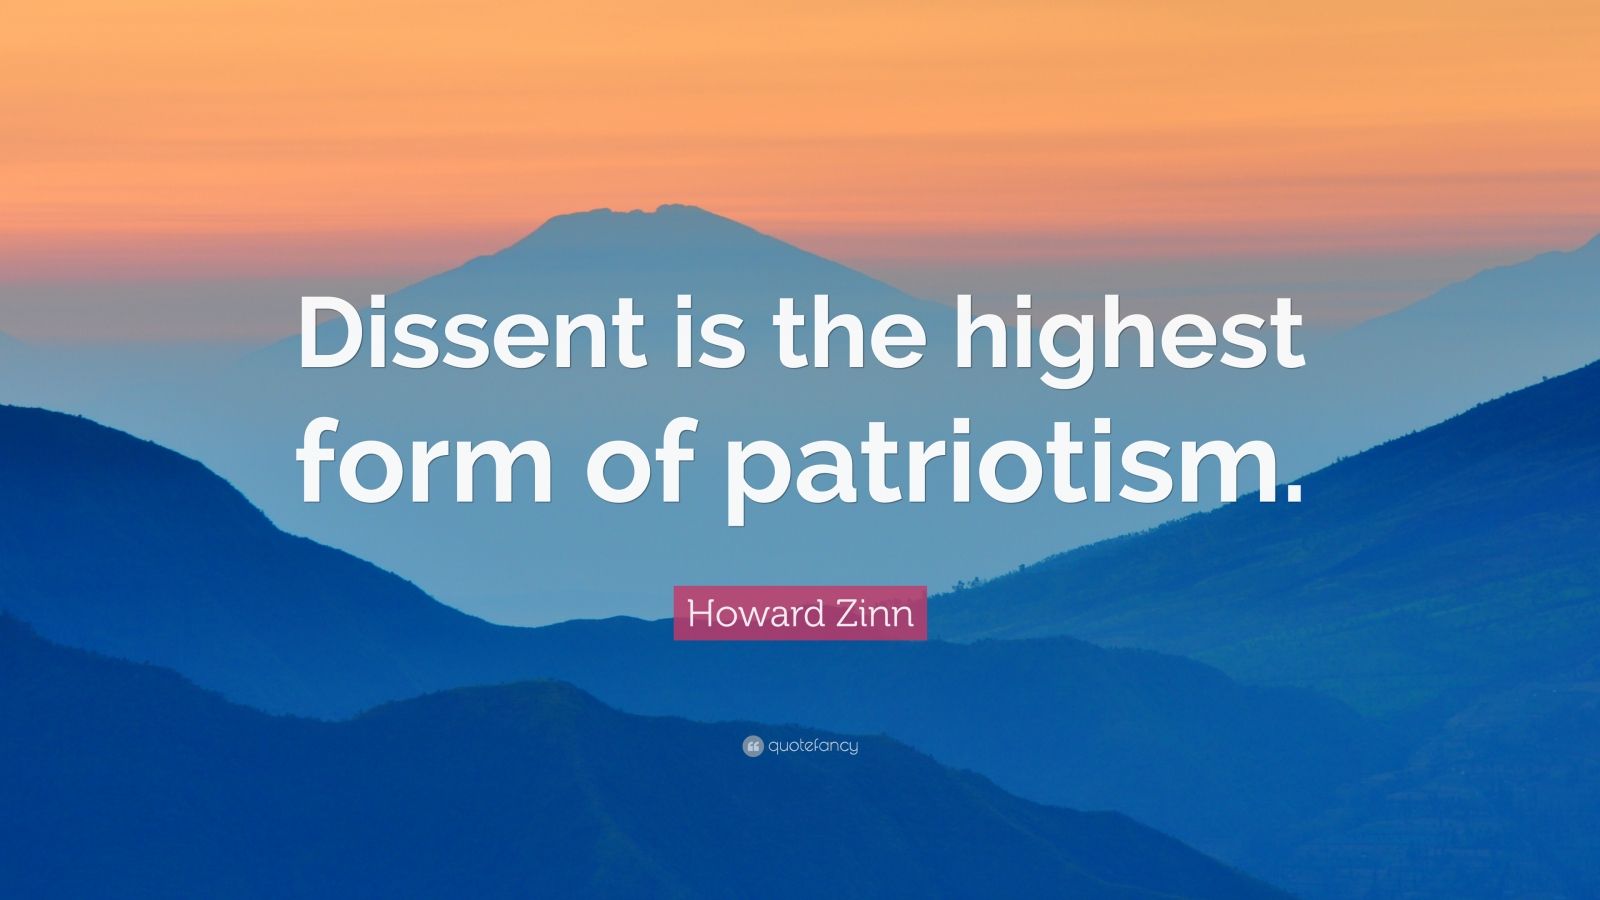 howard-zinn-quote-dissent-is-the-highest-form-of-patriotism-12